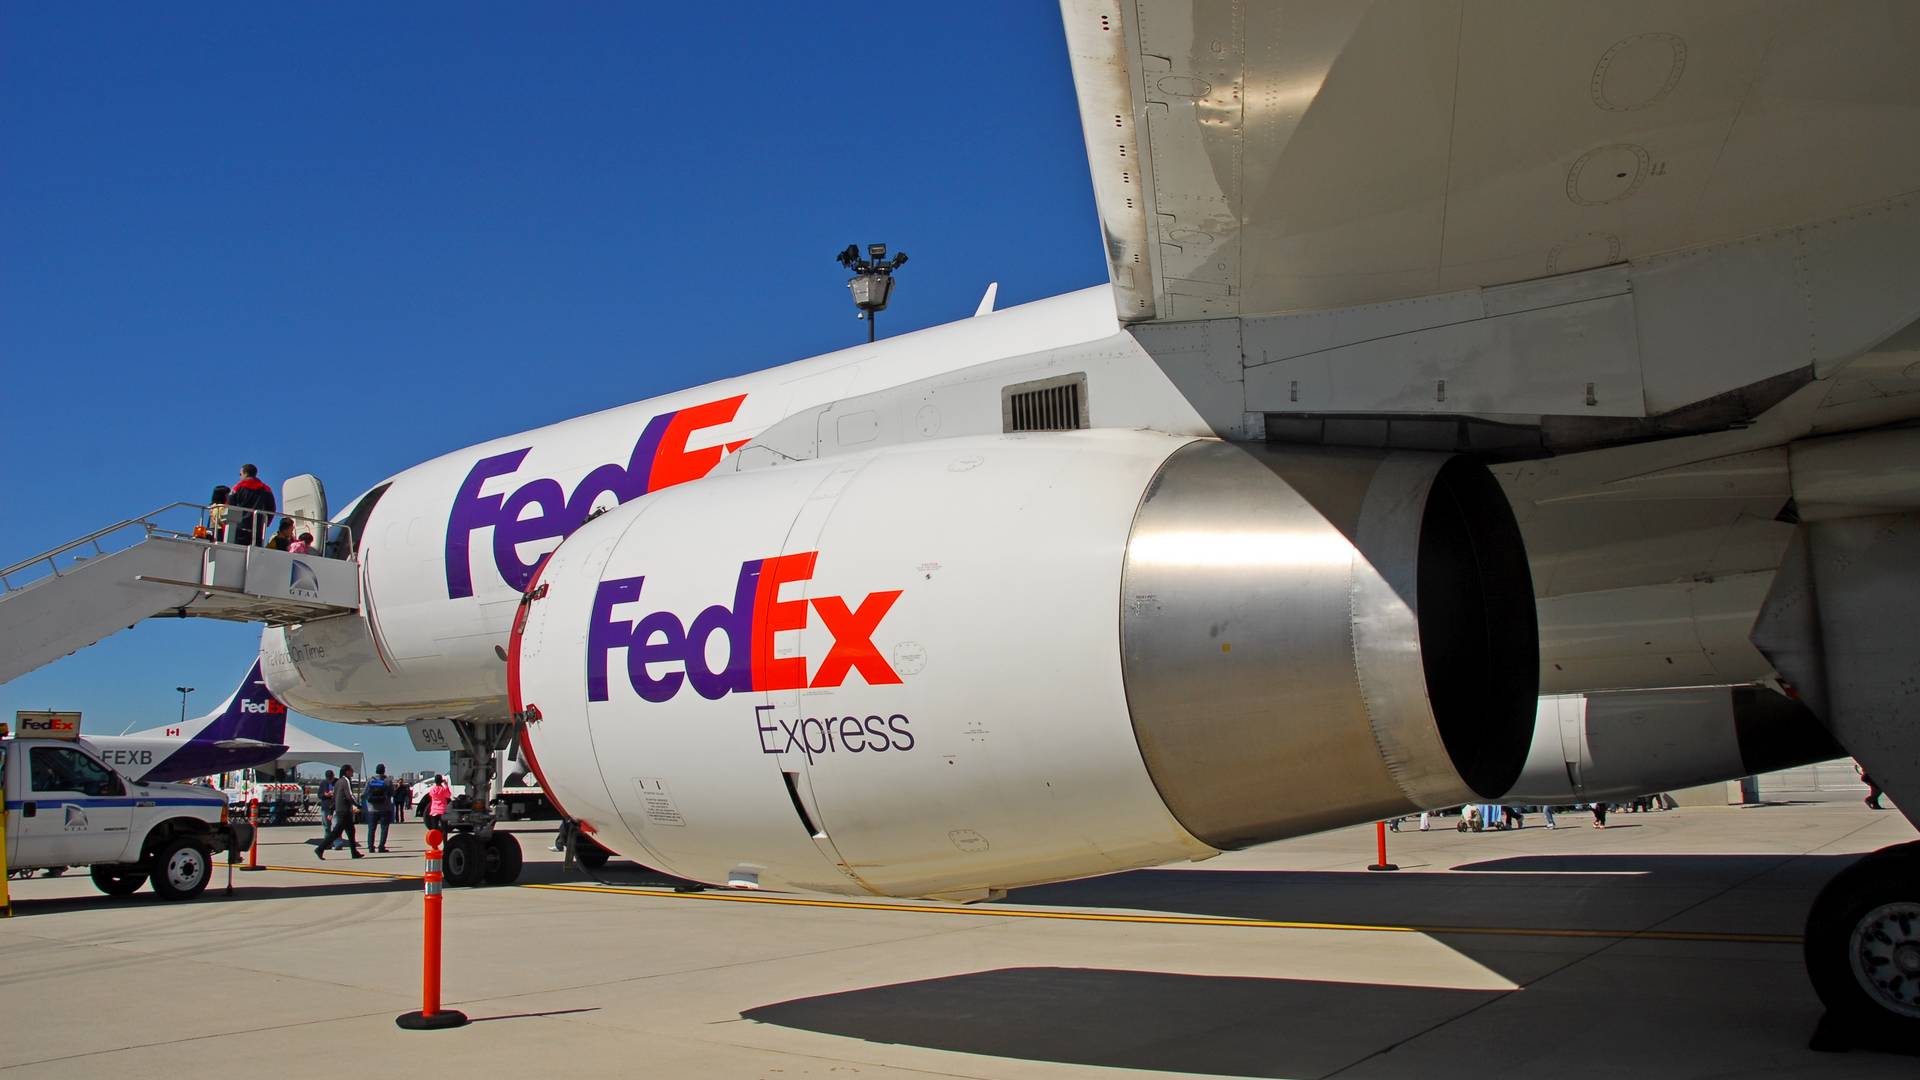 FedEx Pilots Told To Go To American Airlines – via Regional!